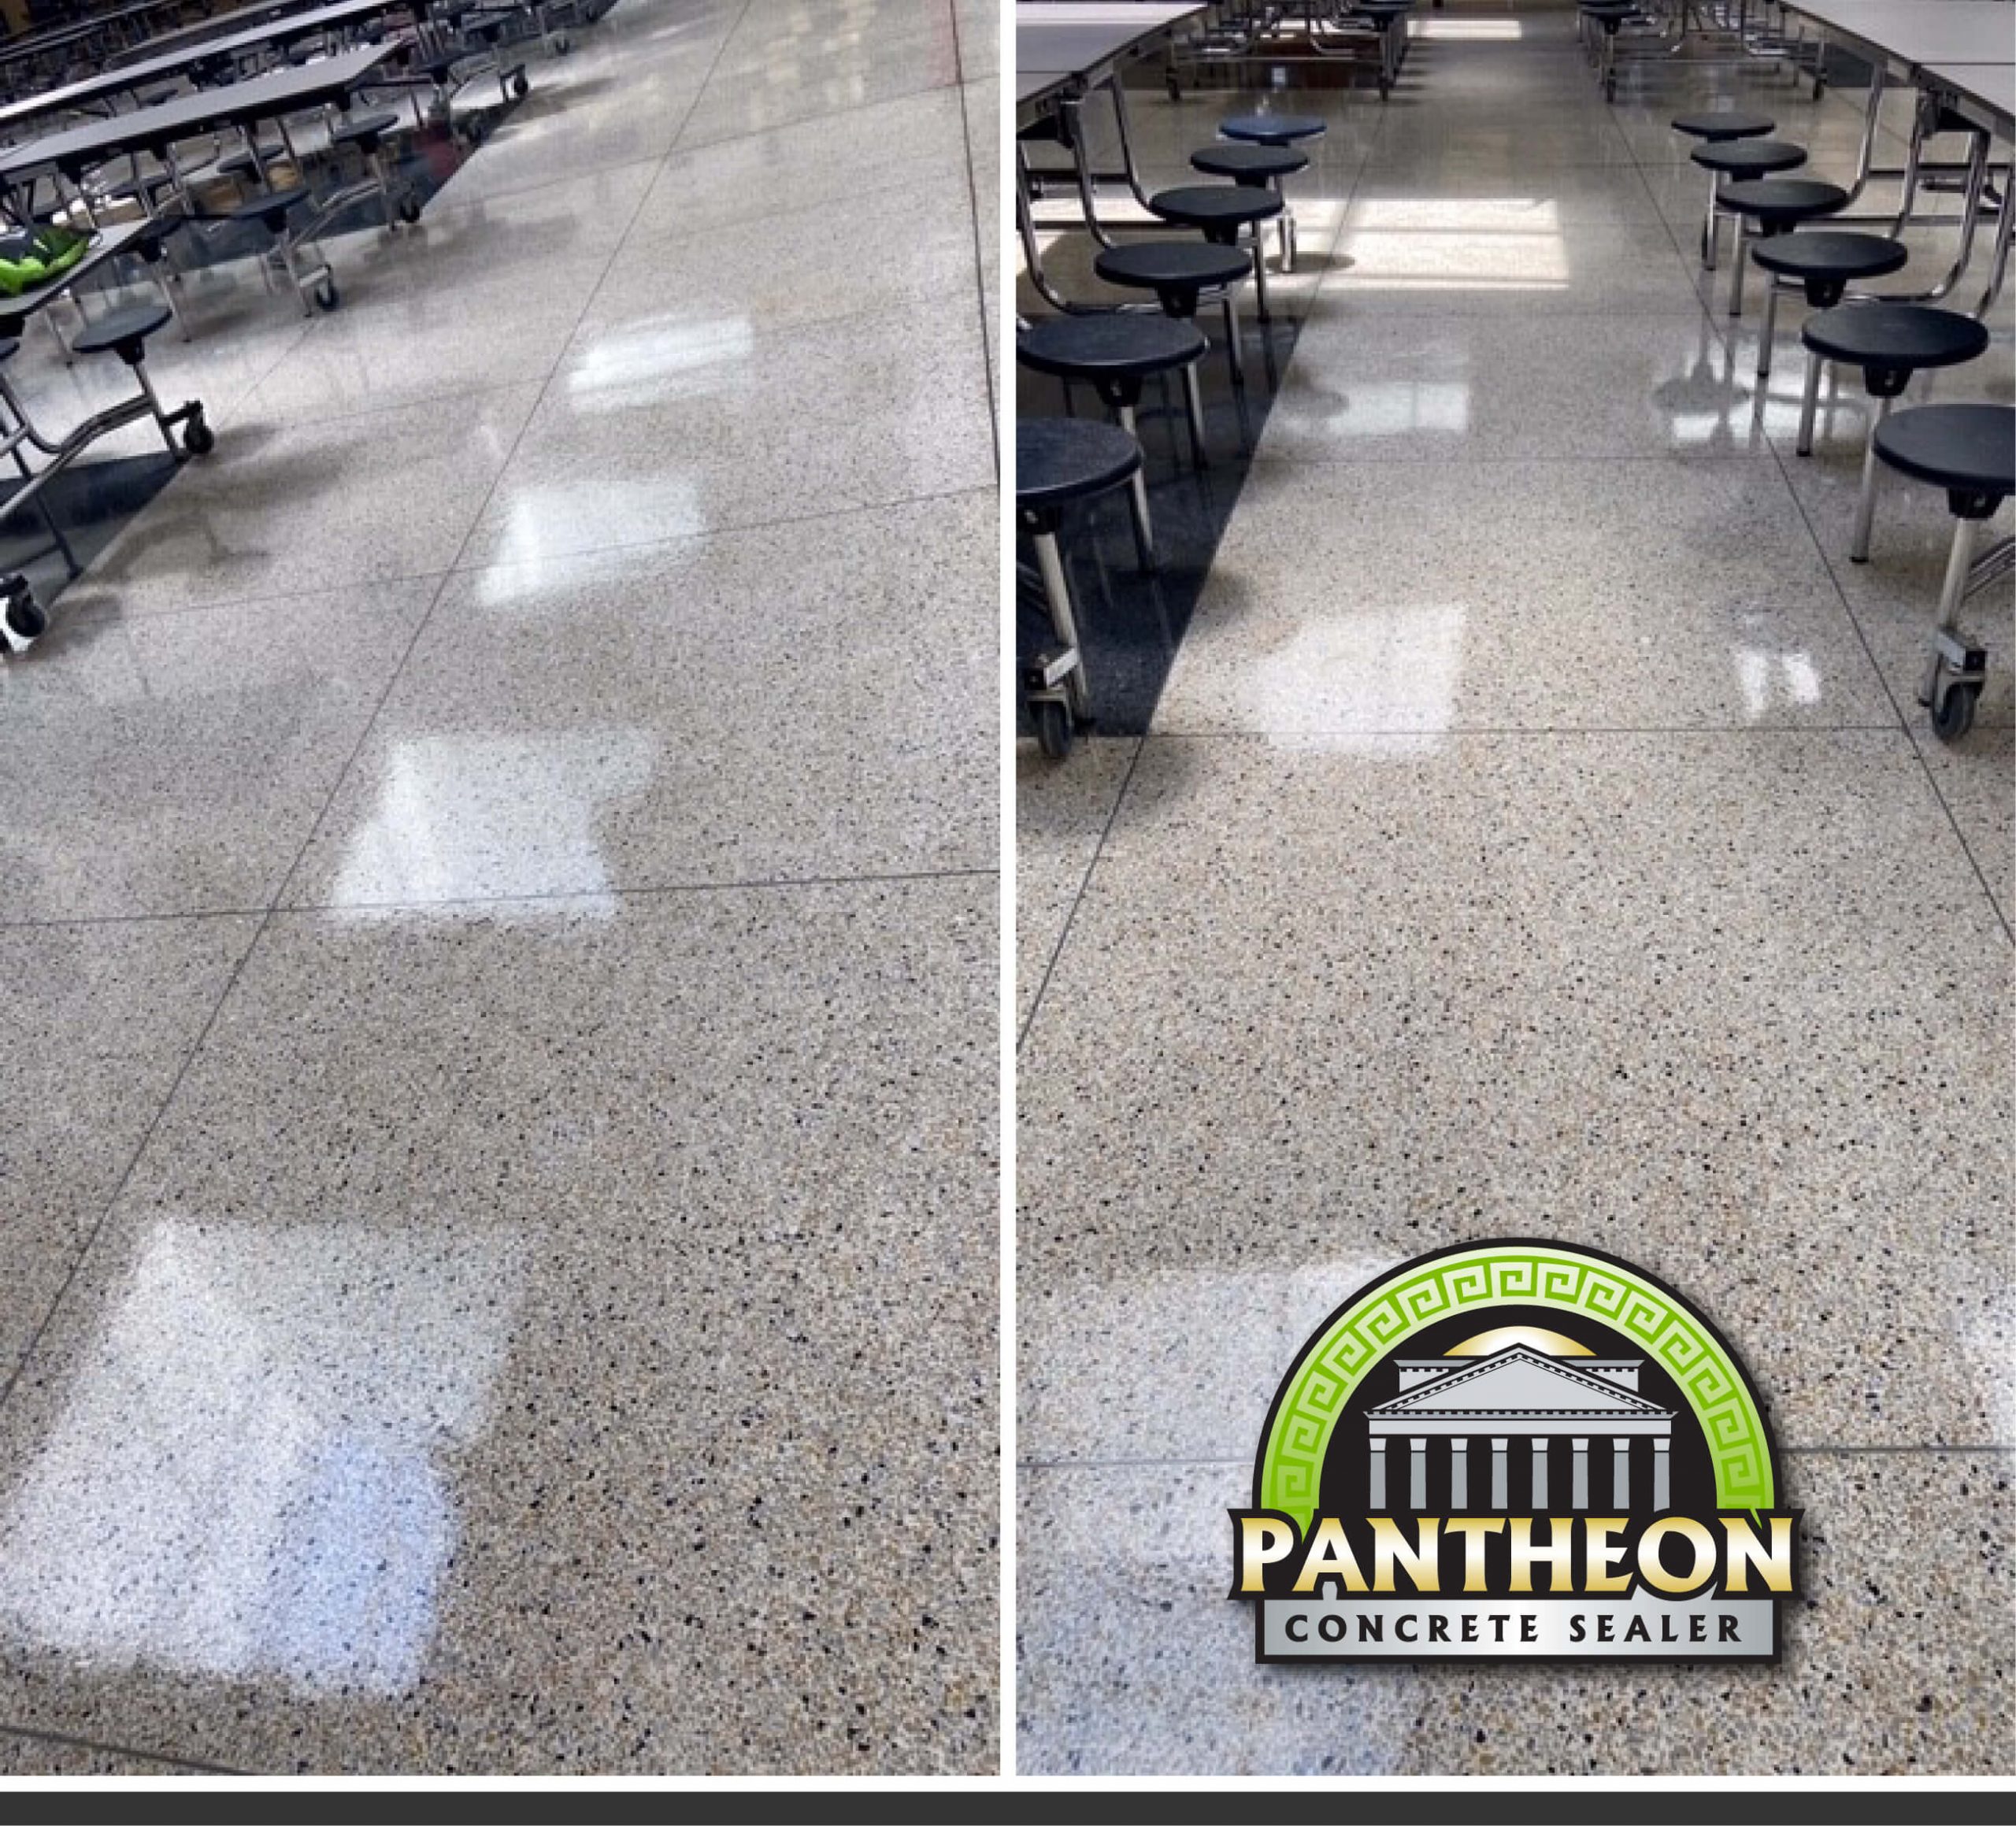 Showing the gloss of a few floors done with Pantheon Concrete Sealer